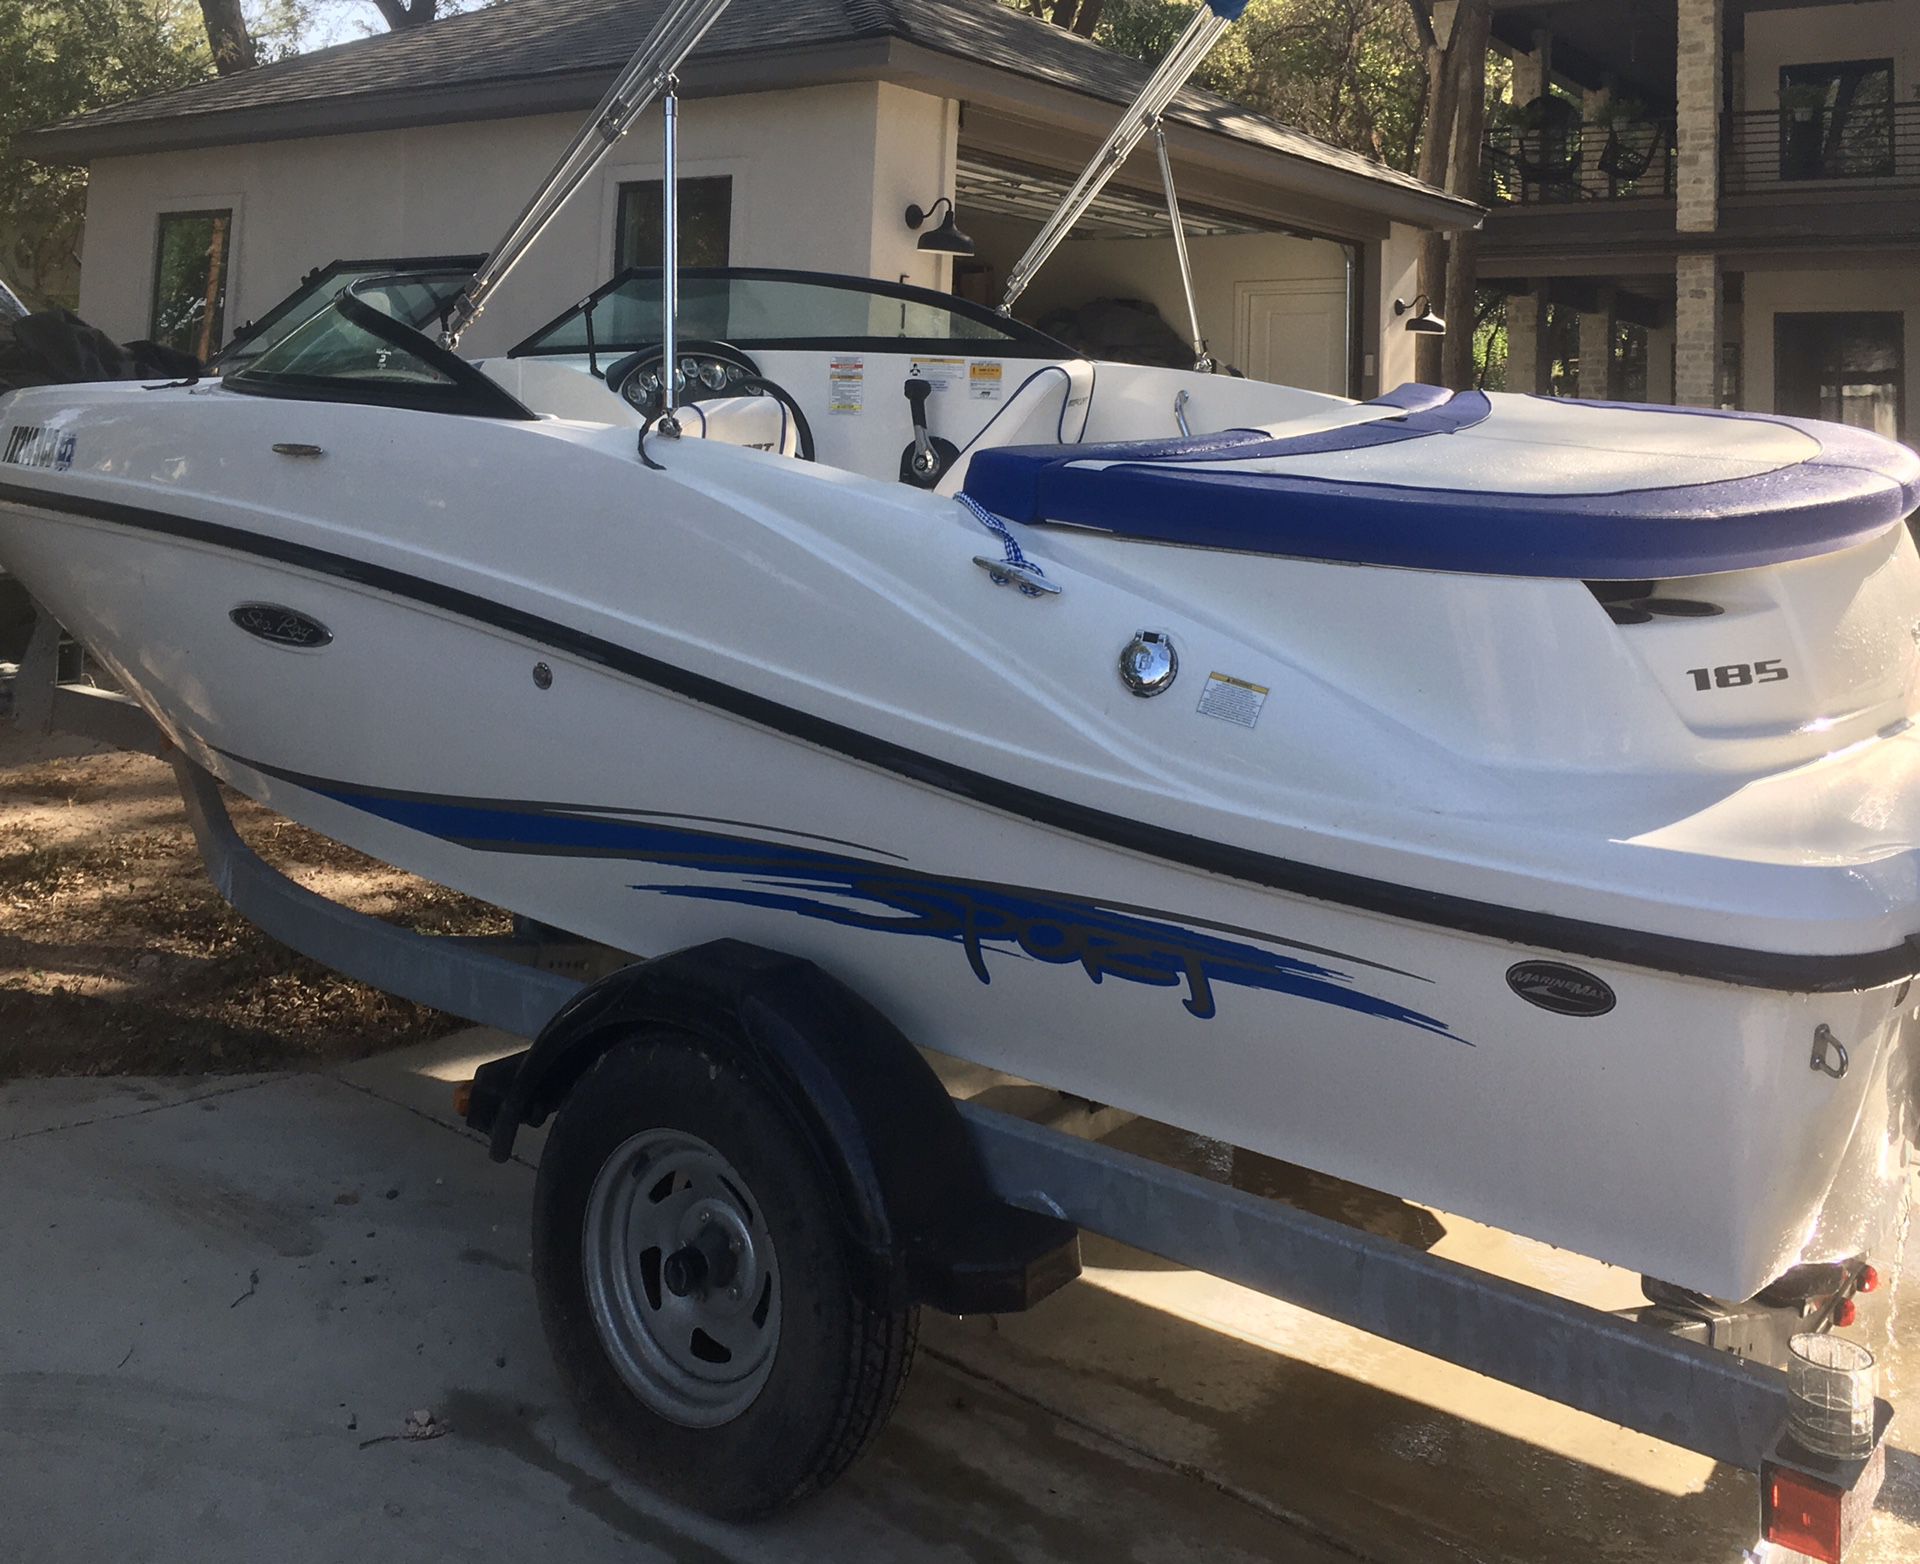 Photo 2012 sea ray sport 185 boat in great condition and very low hours